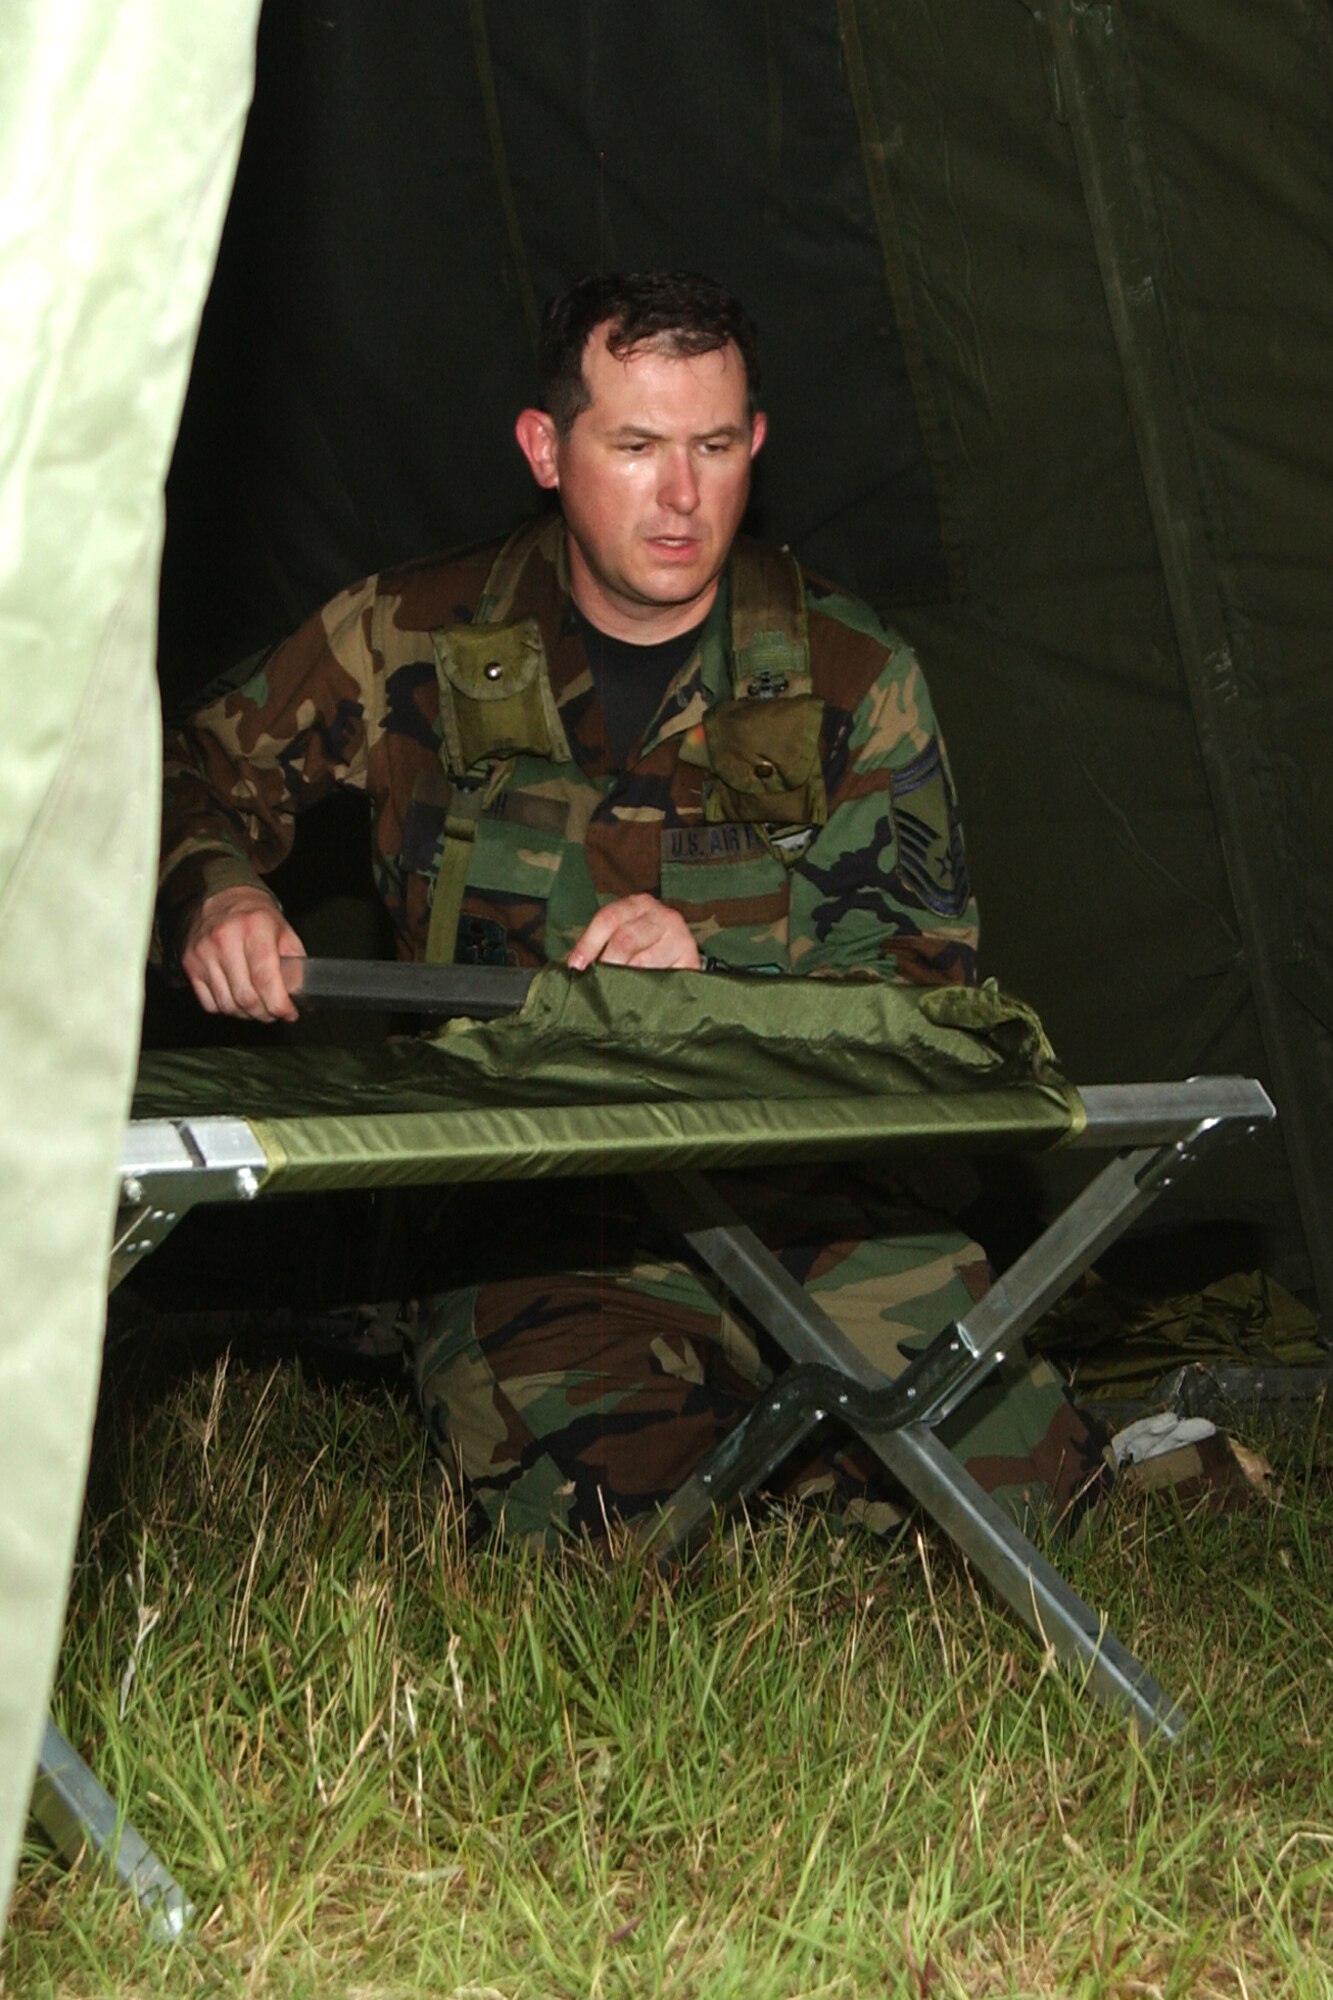 Senior Master Sgt. Gary Ash puts his cot together after a long day in the field on Saturday. (Photo by Master Sgt. Dianna Seerey)